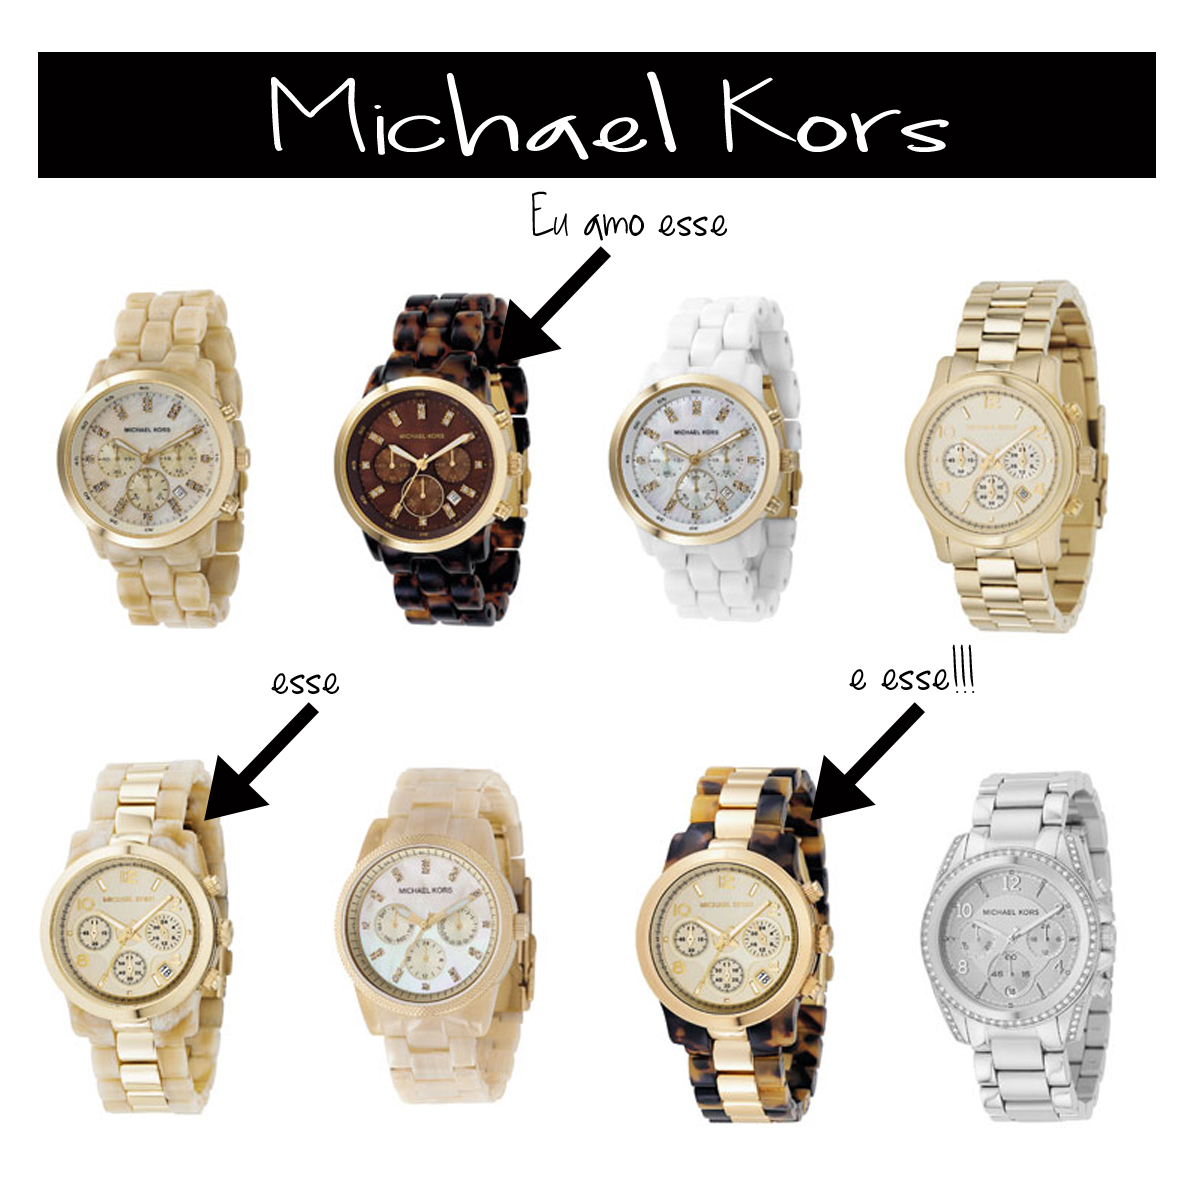 how much are michael kors watches worth